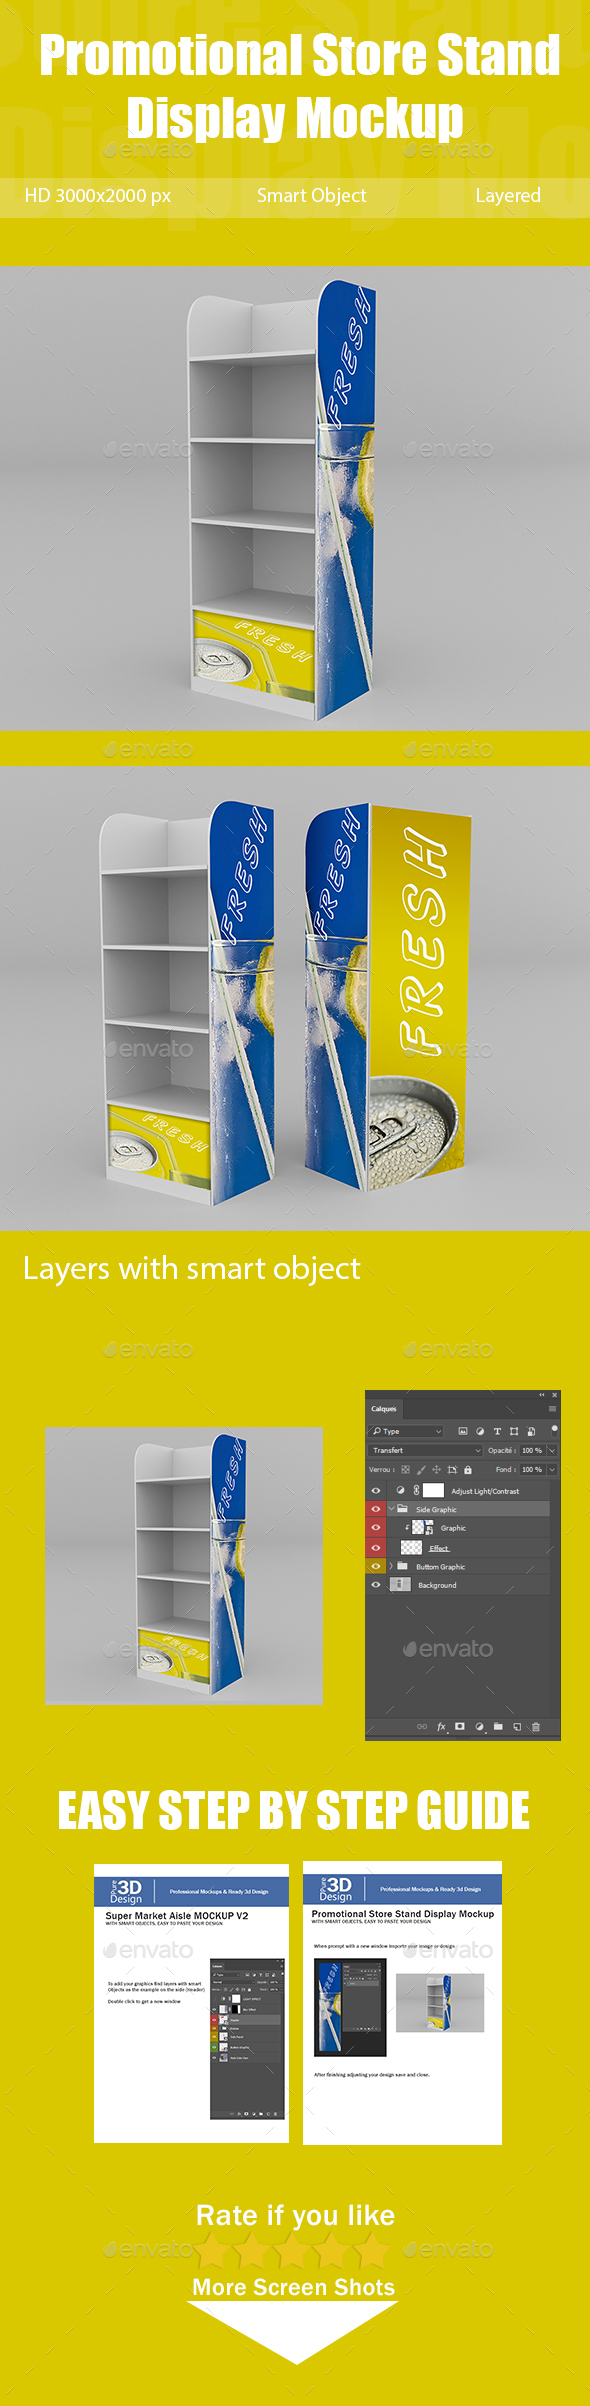 Promotional Store Stand Display Mockup By Pure3ddesign Graphicriver